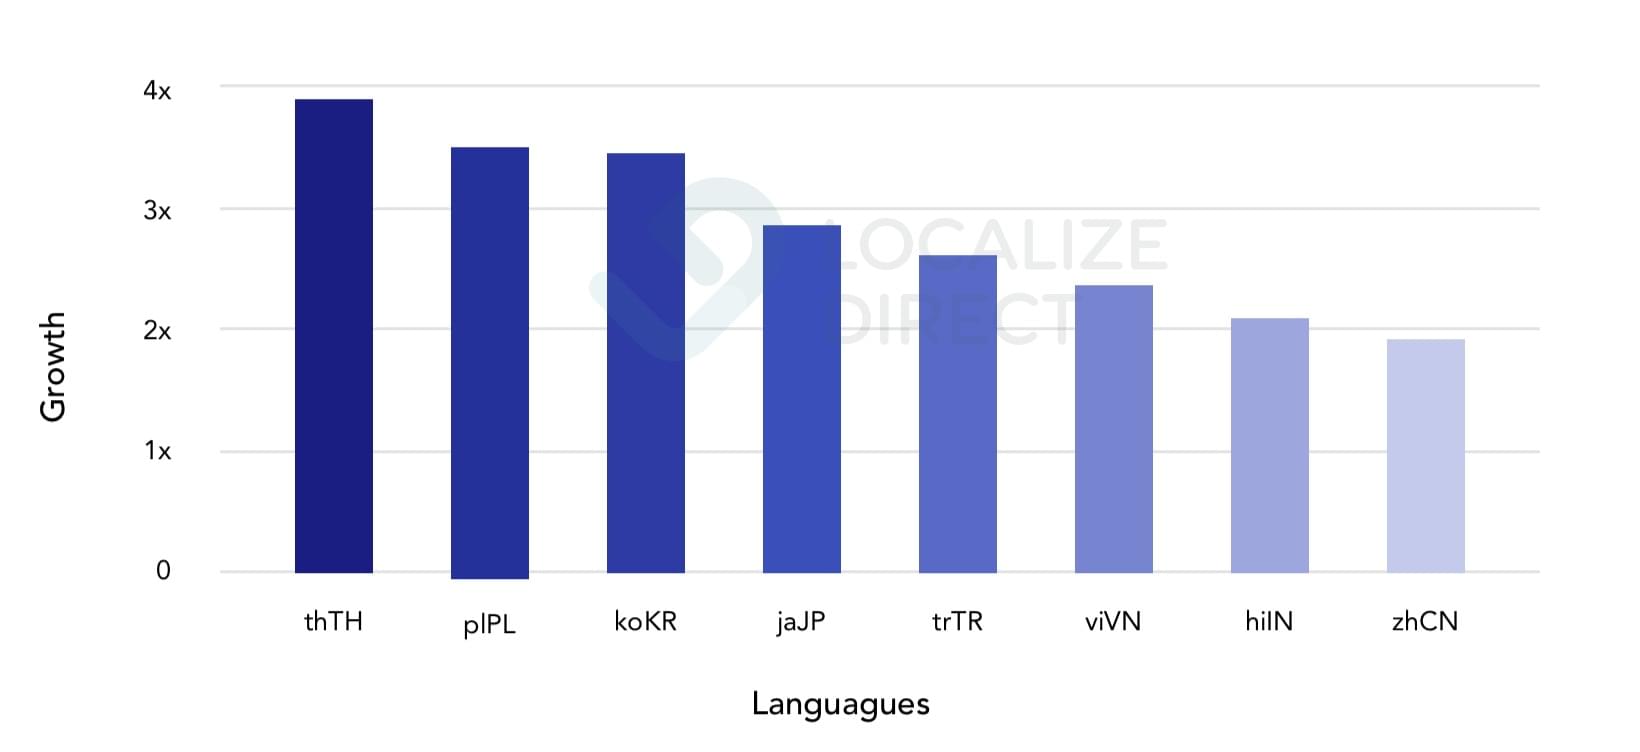 Fastest-growing languages in game localization 2020